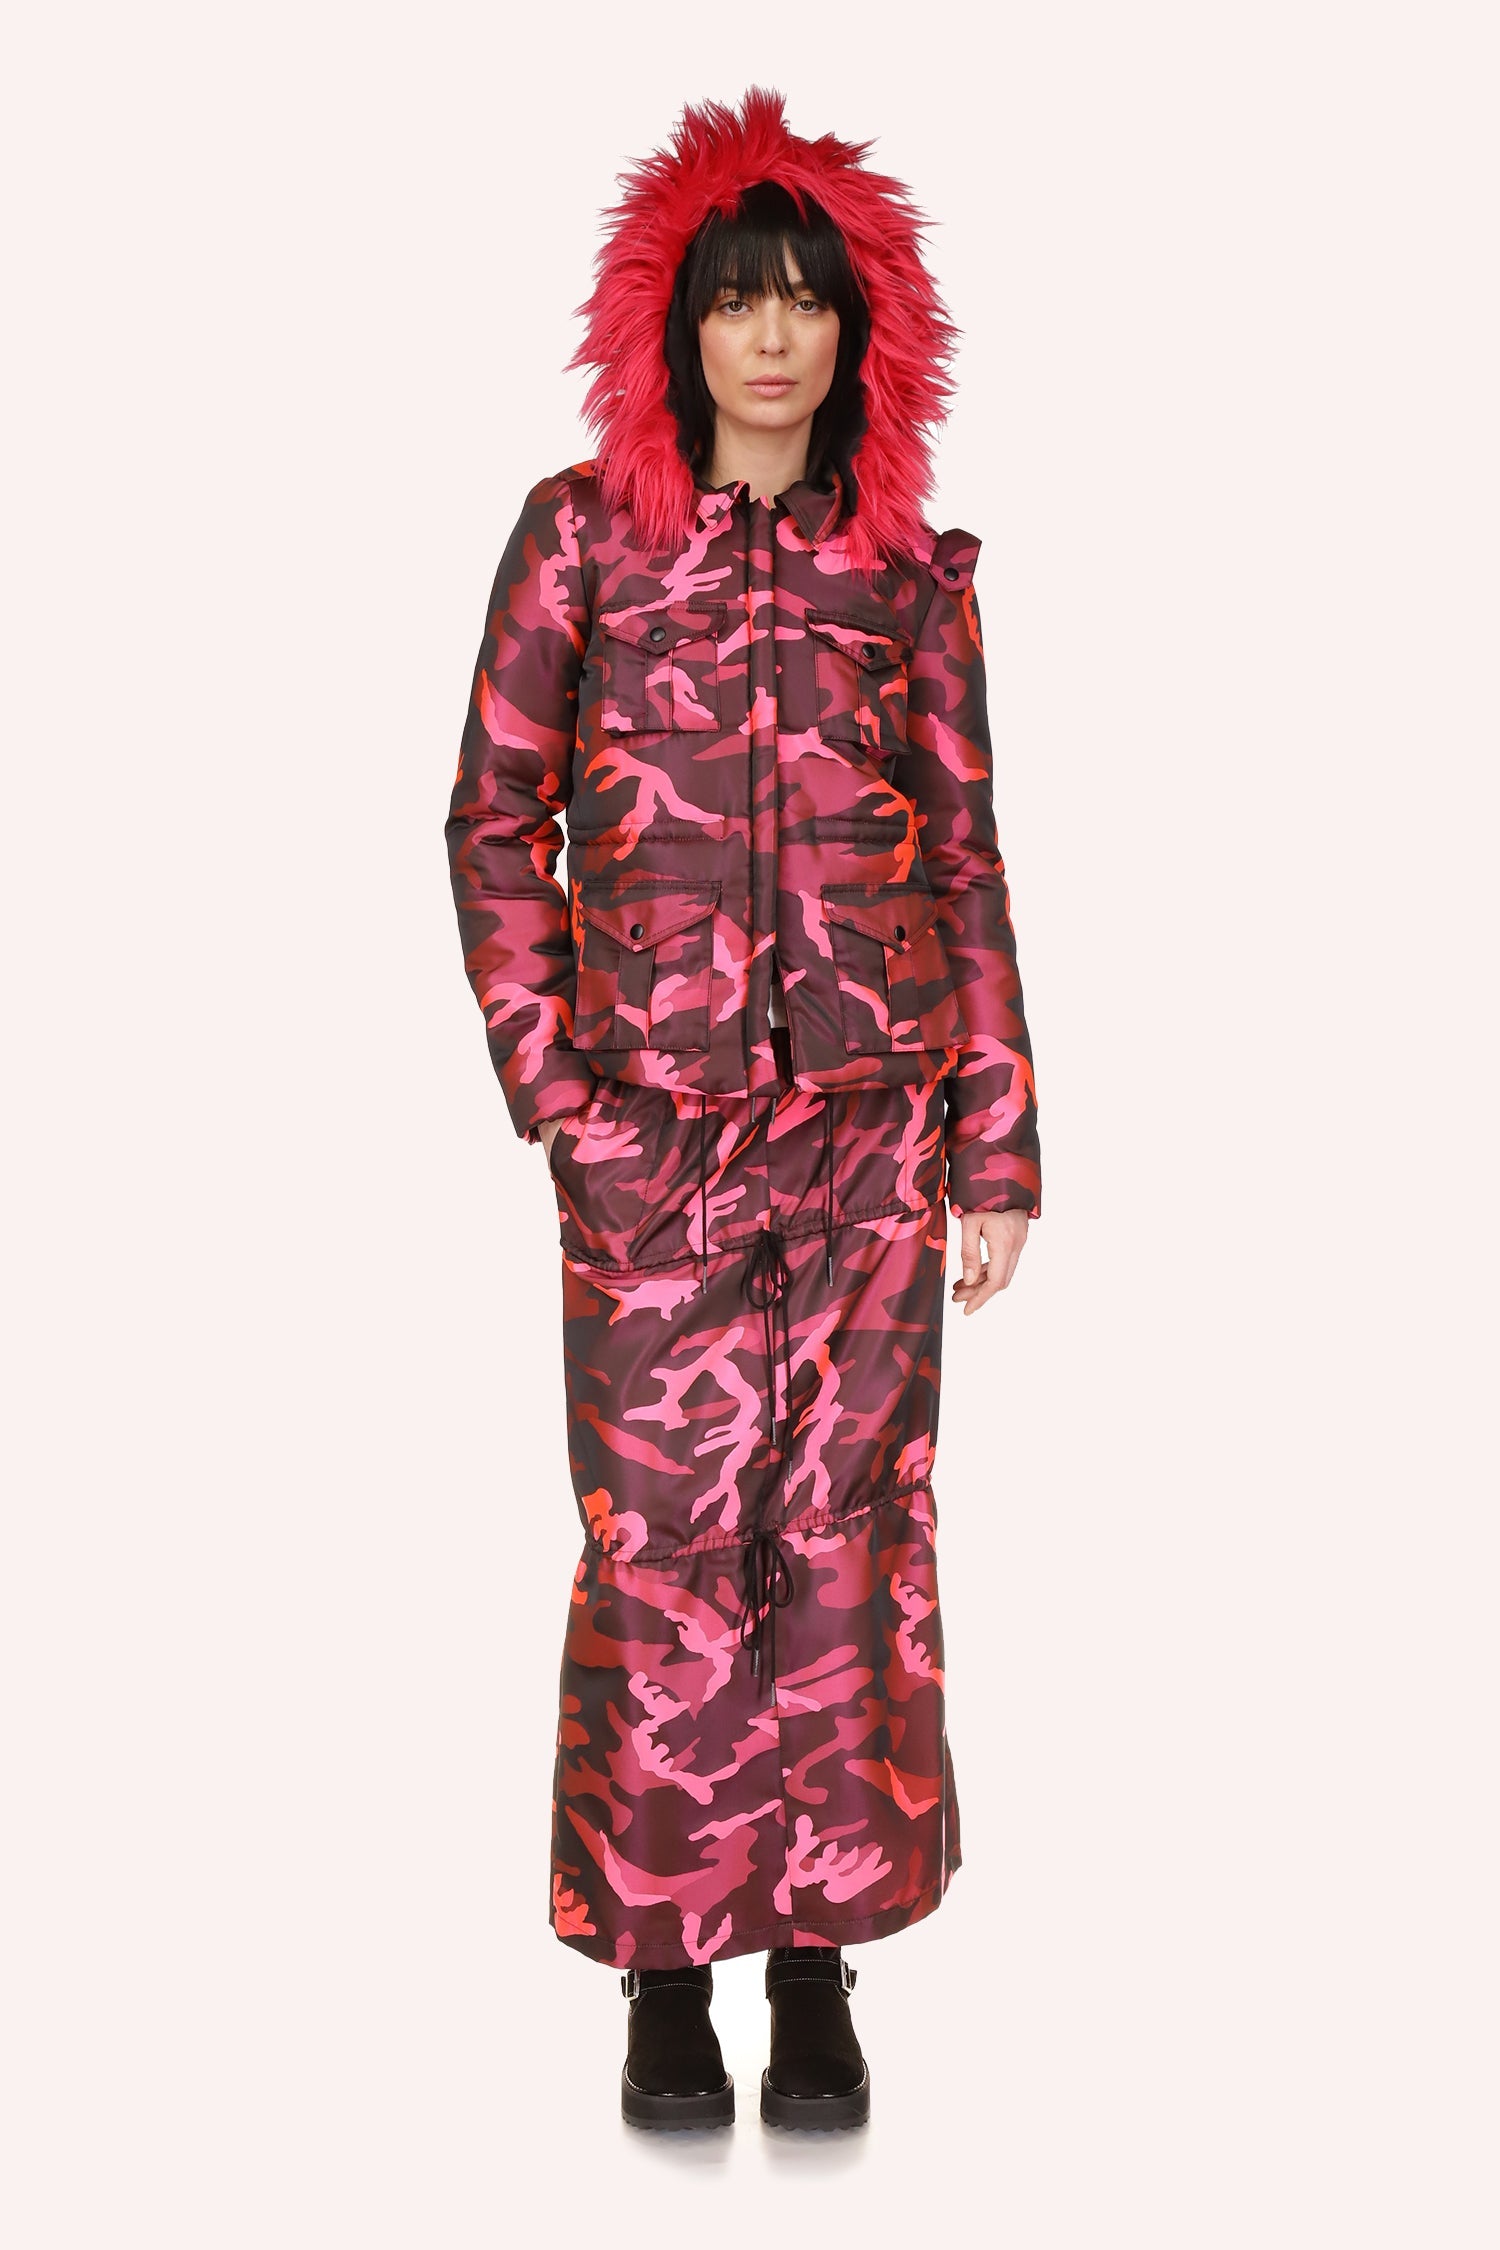 Neon Camouflage Jacket Hot Pink is a camouflage-style pattern with varying shades of dark pink, pink, and light pink